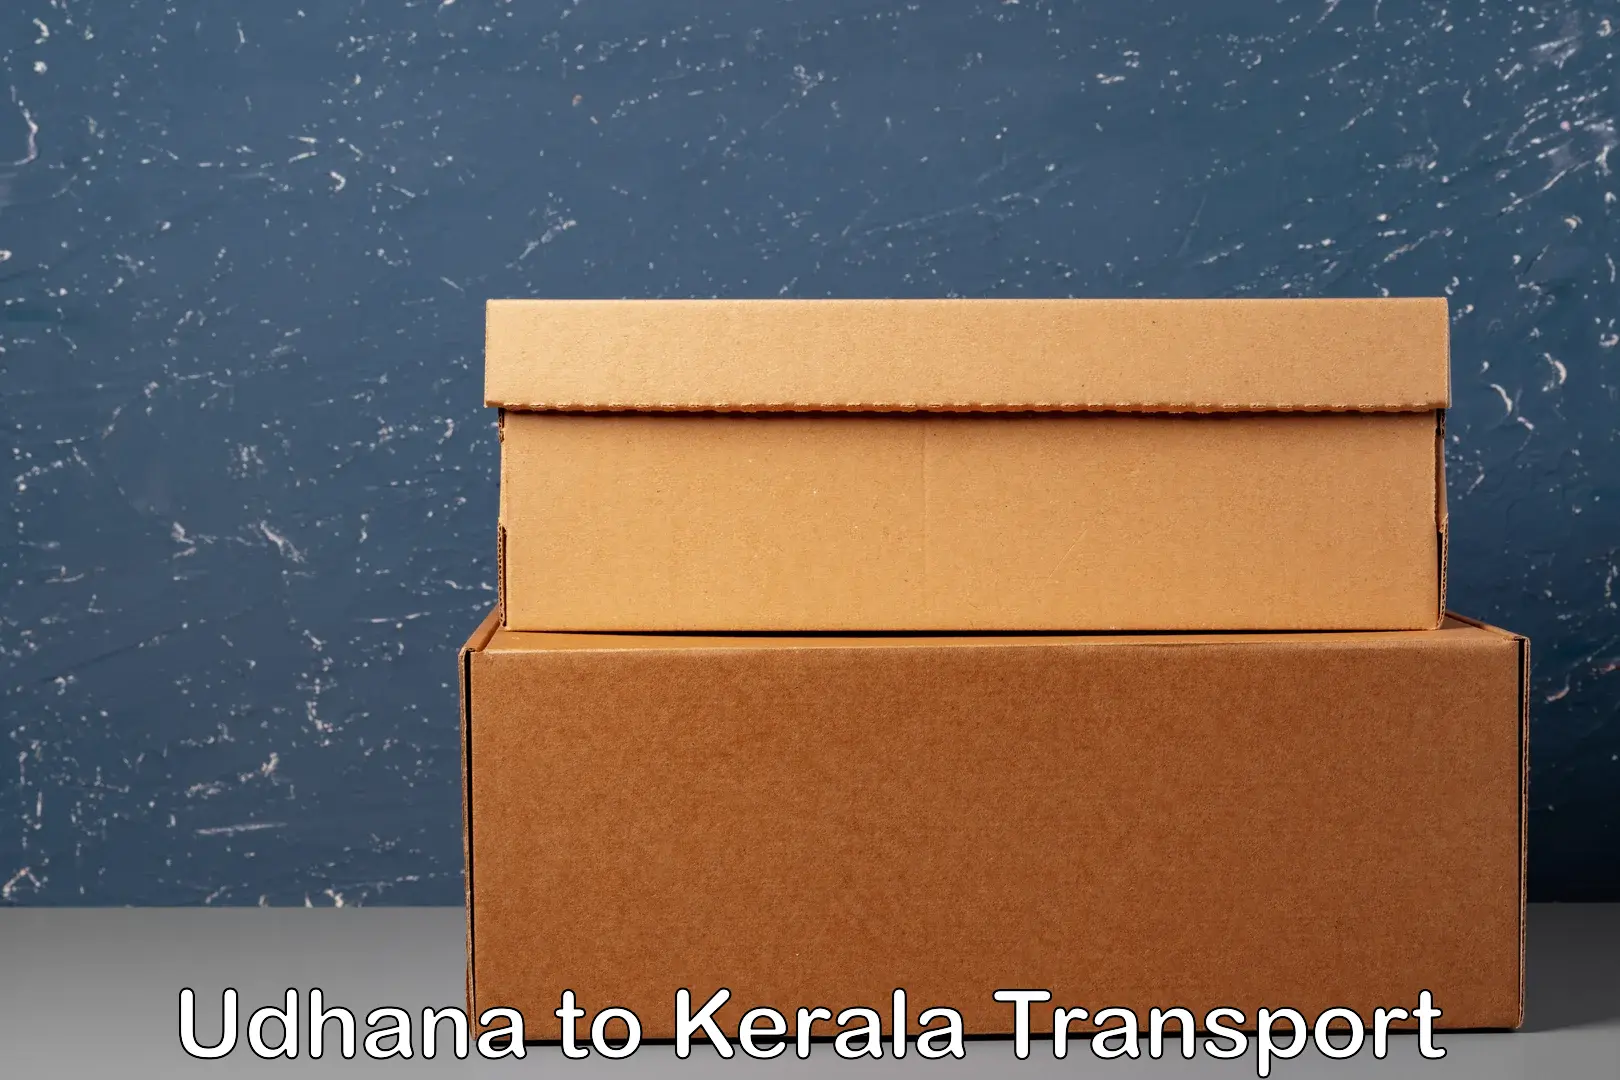 Parcel transport services in Udhana to Cochin University of Science and Technology